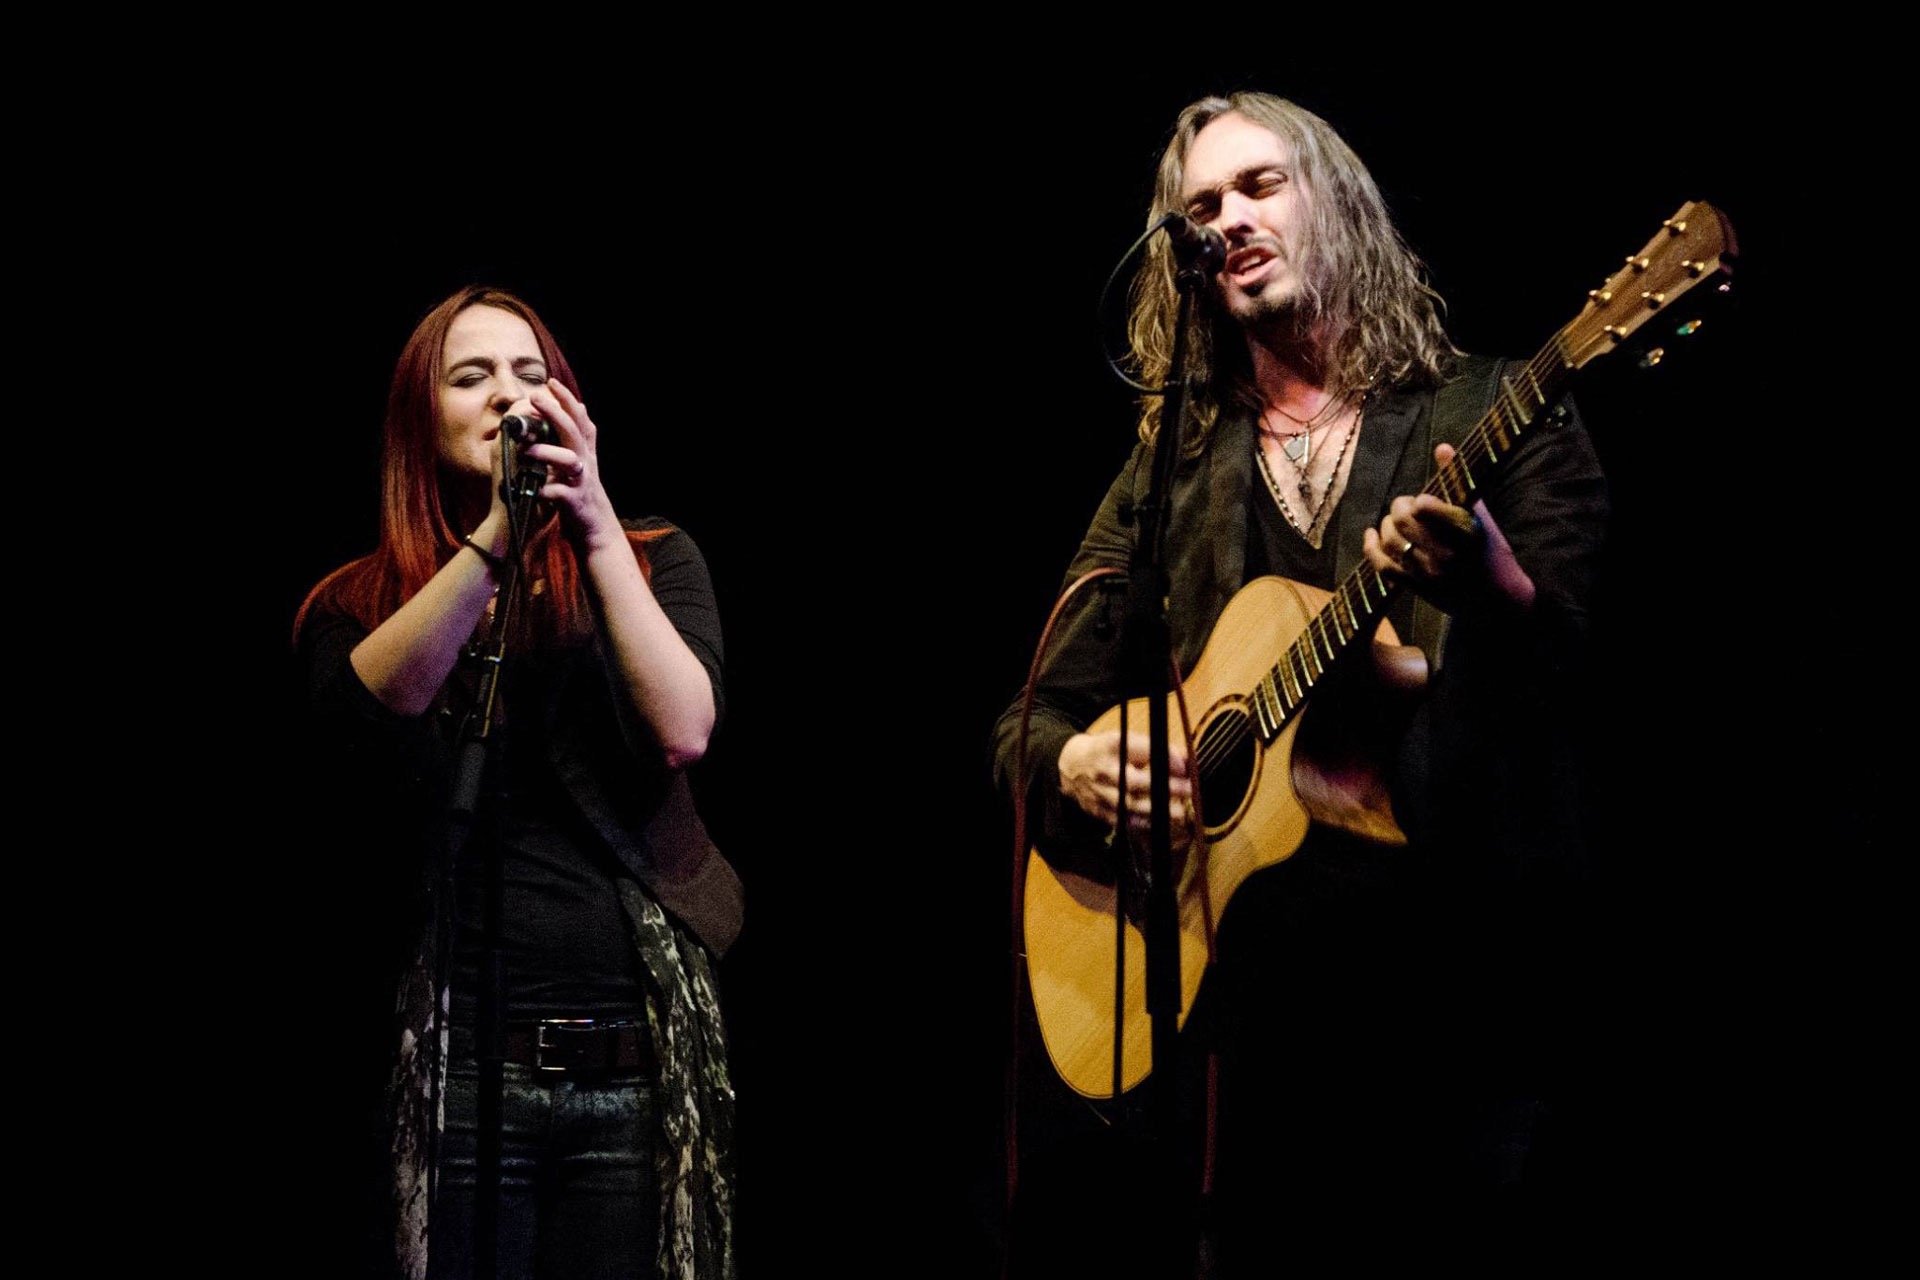 Award winning folk duo The Black Feathers set to play on June 20 at The Allen Center